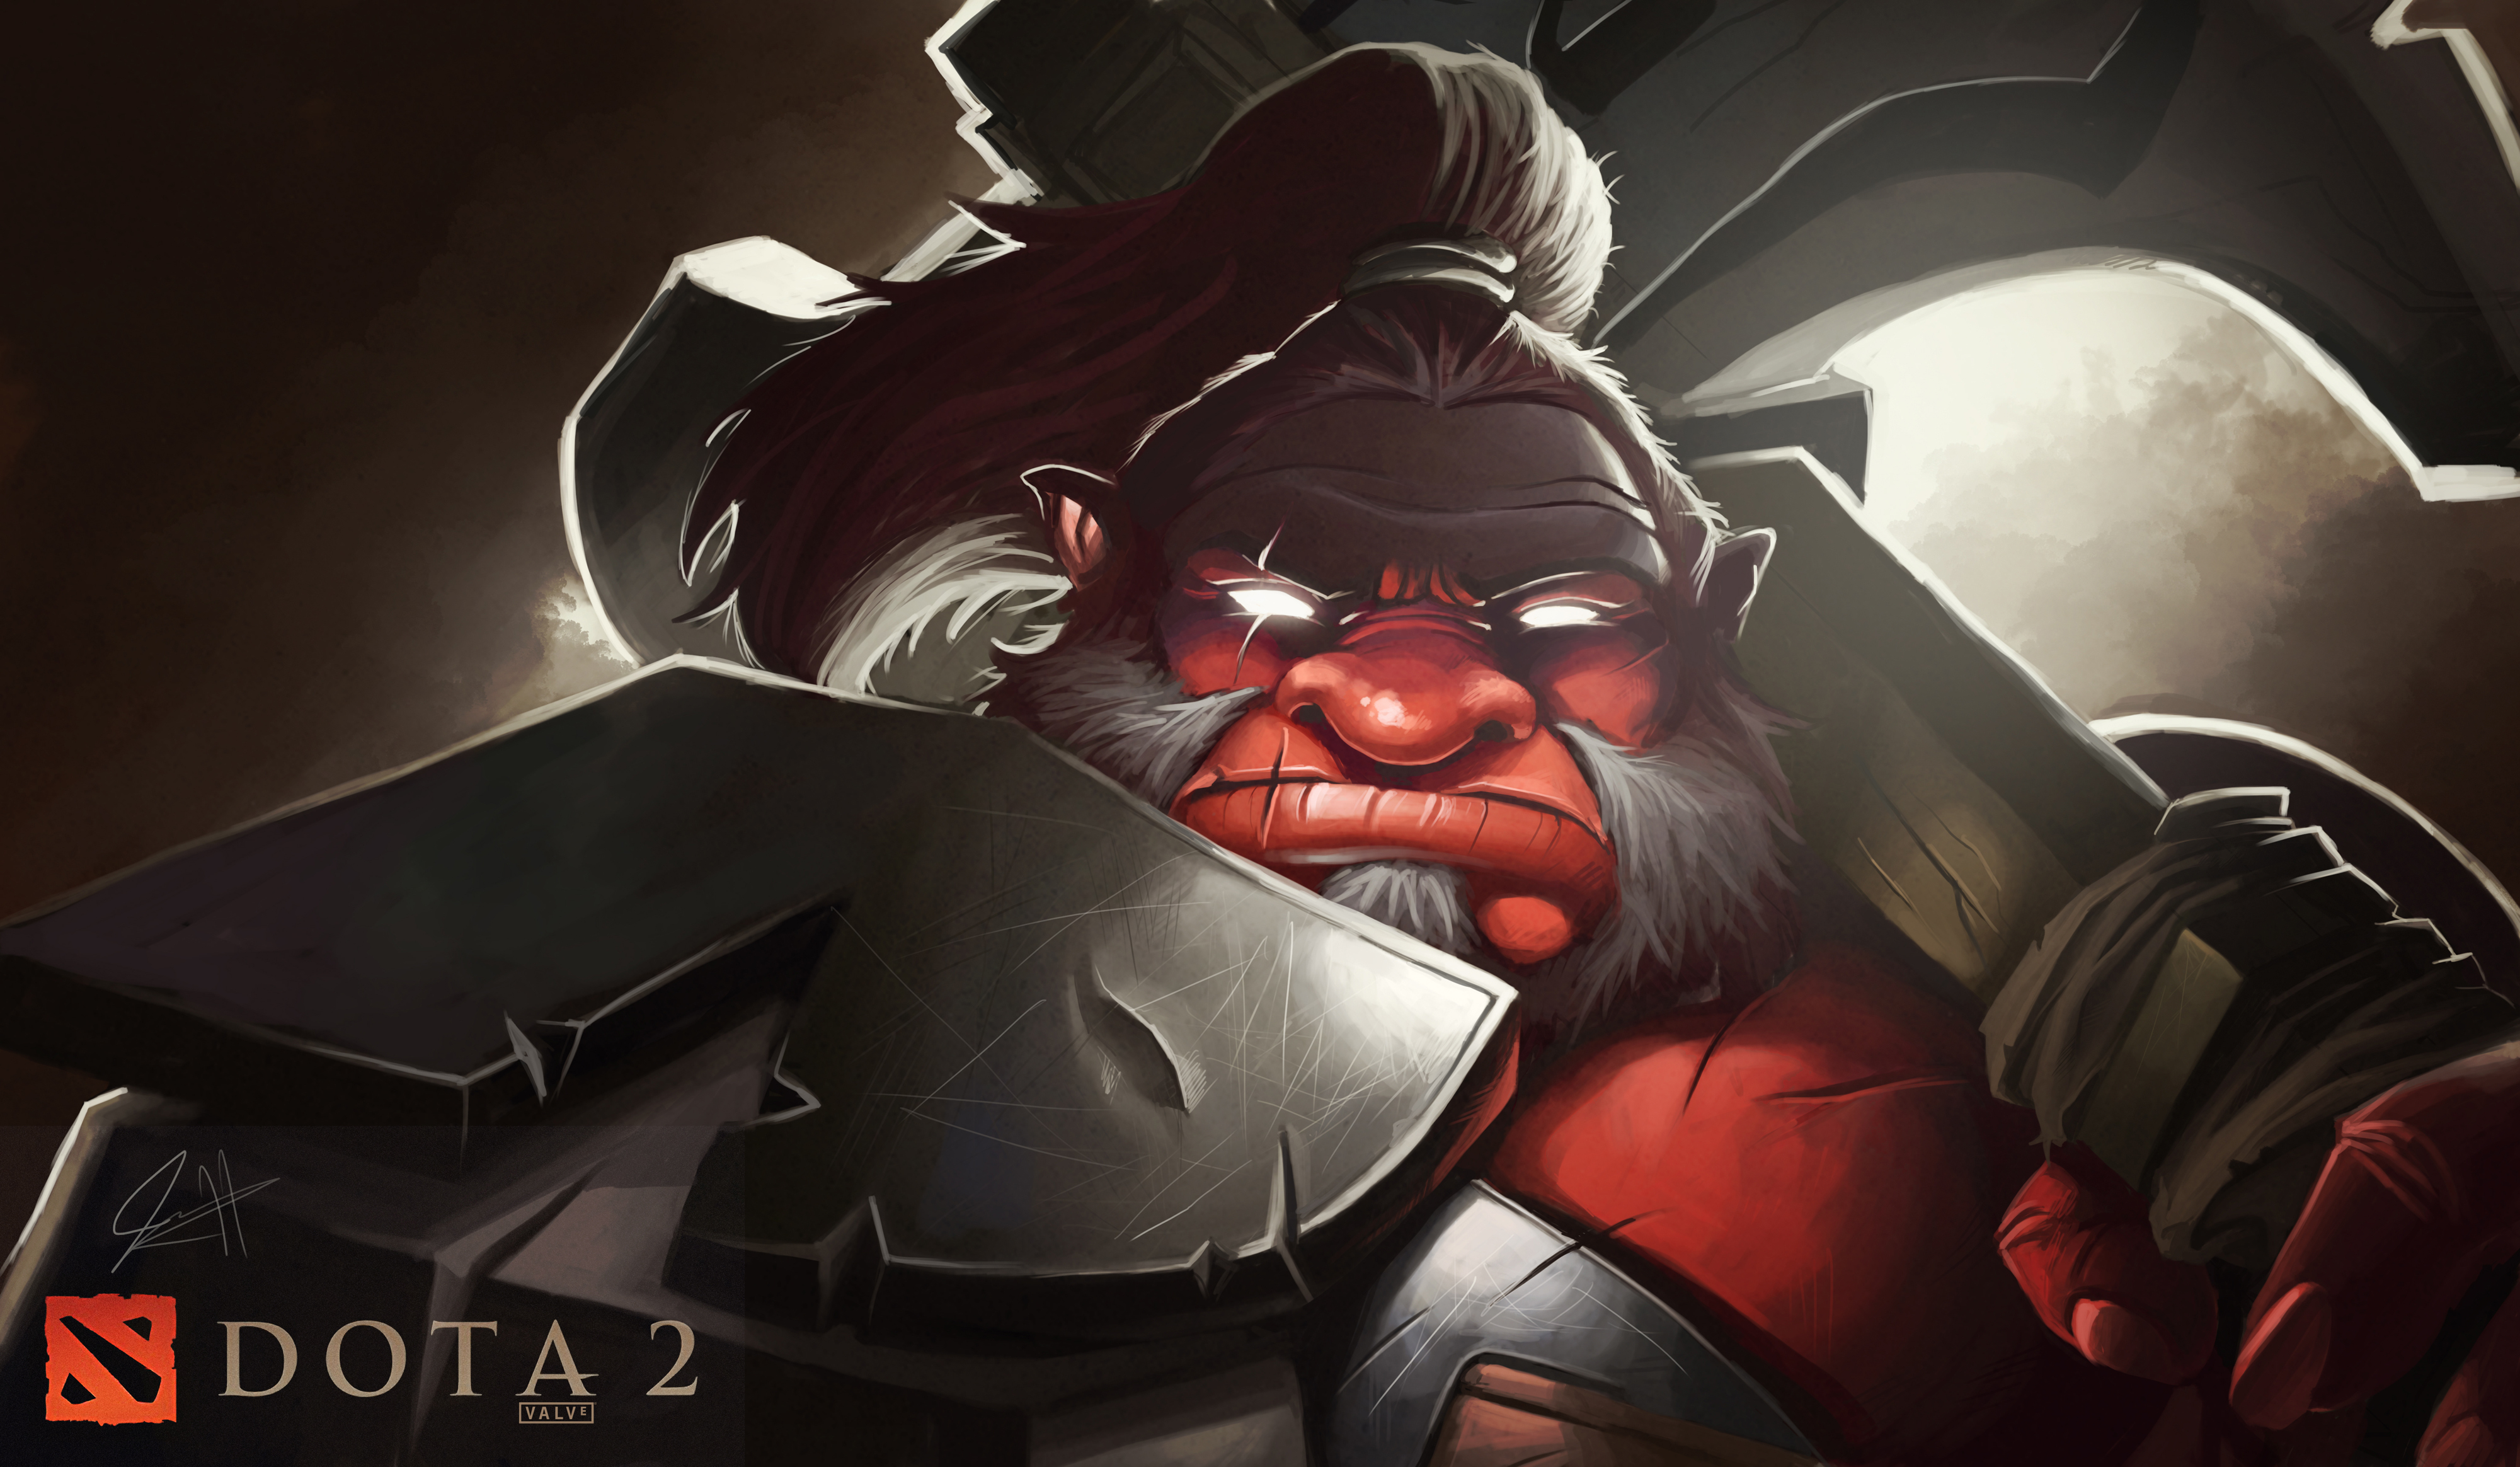 dota 2 wallpapers hd,illustration,fictional character,art,graphic design,animation